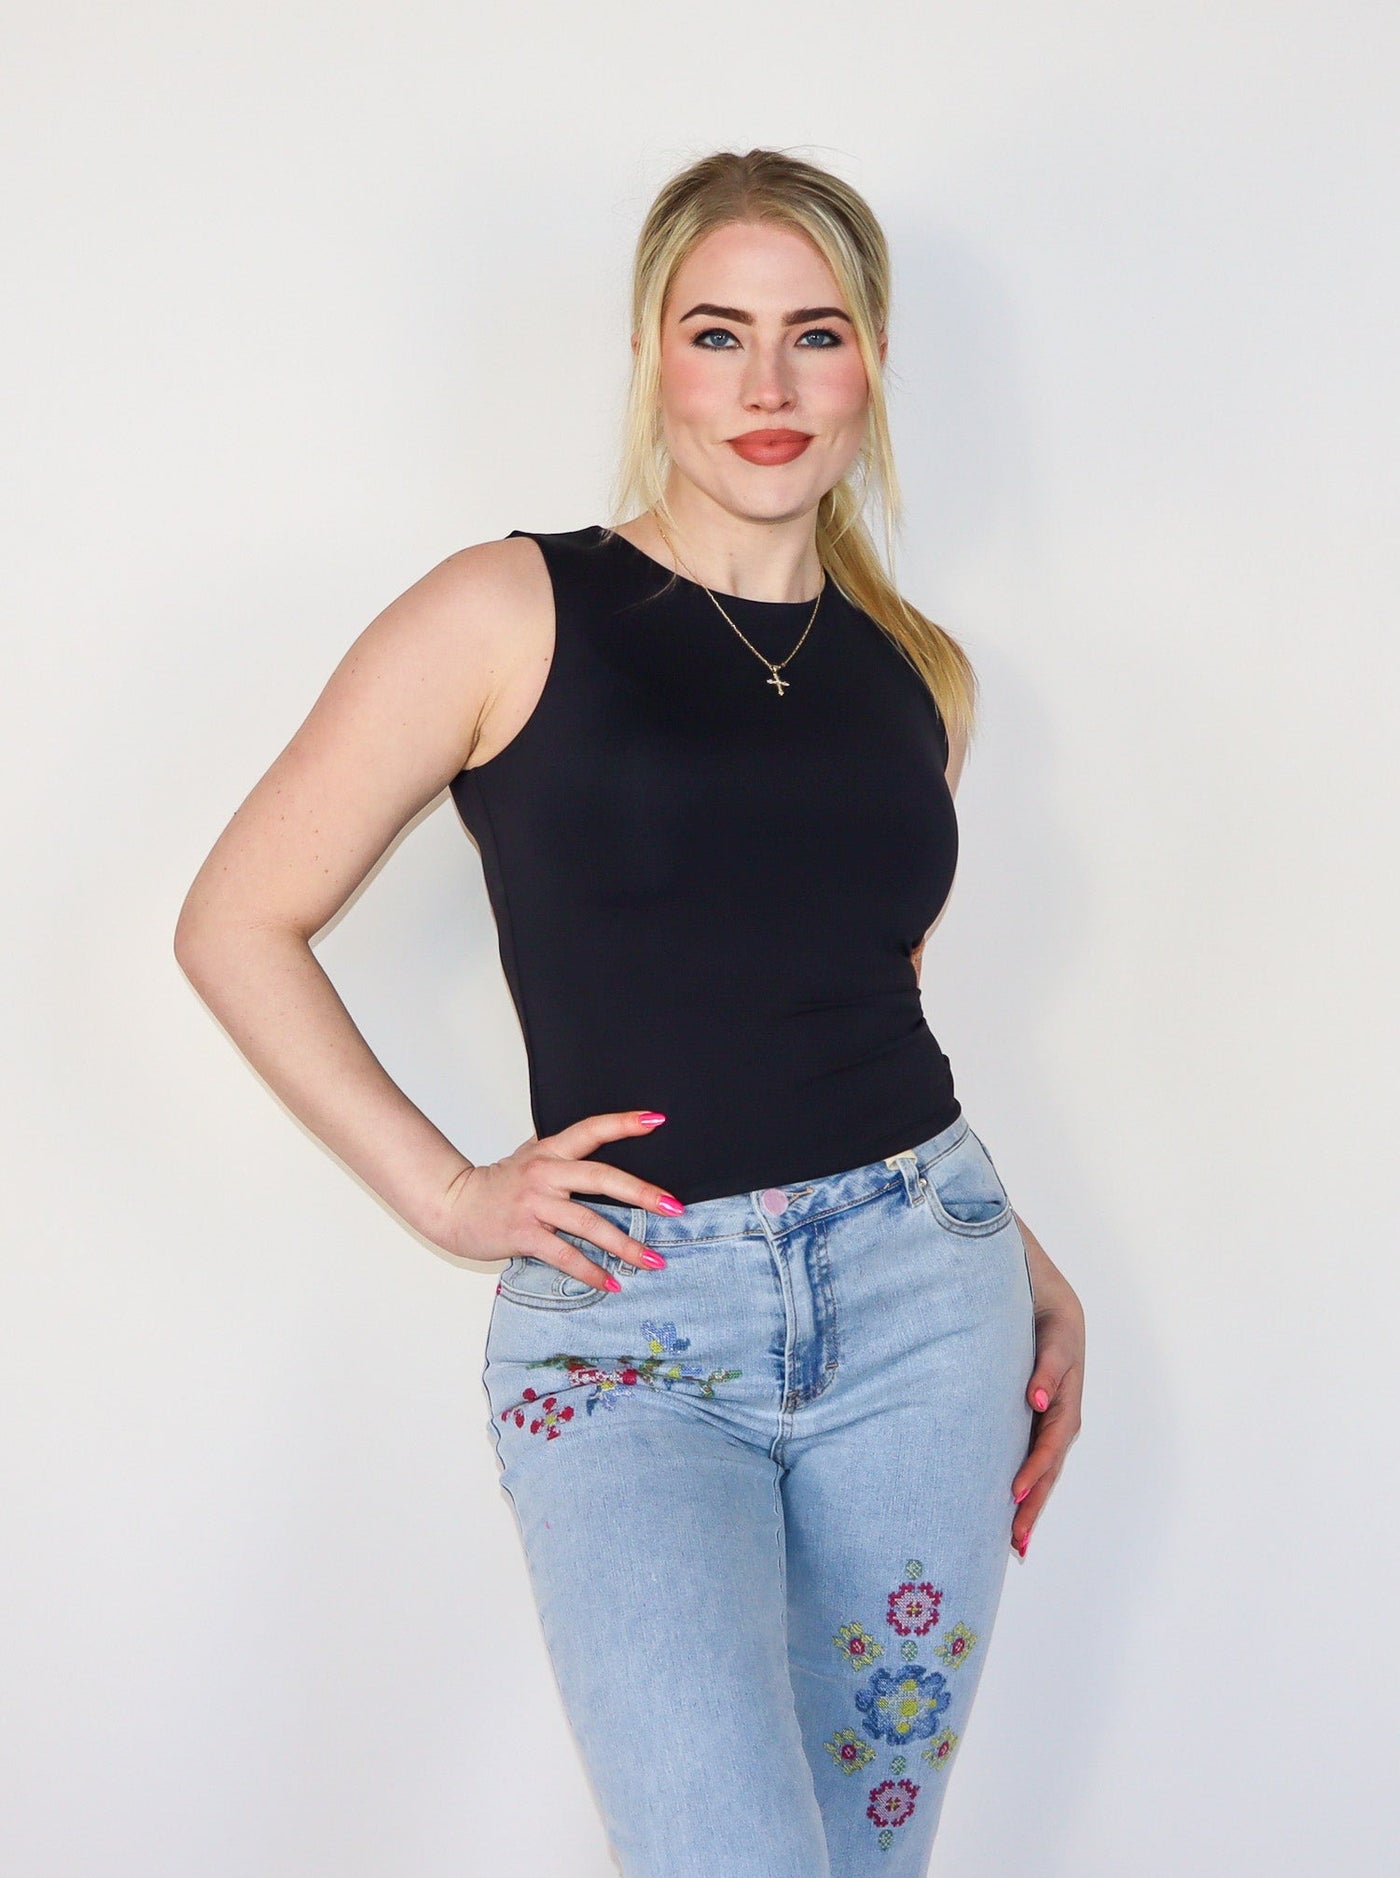 Model is wearing a fitted black crew neck tank top. Top is paired with blue jeans.